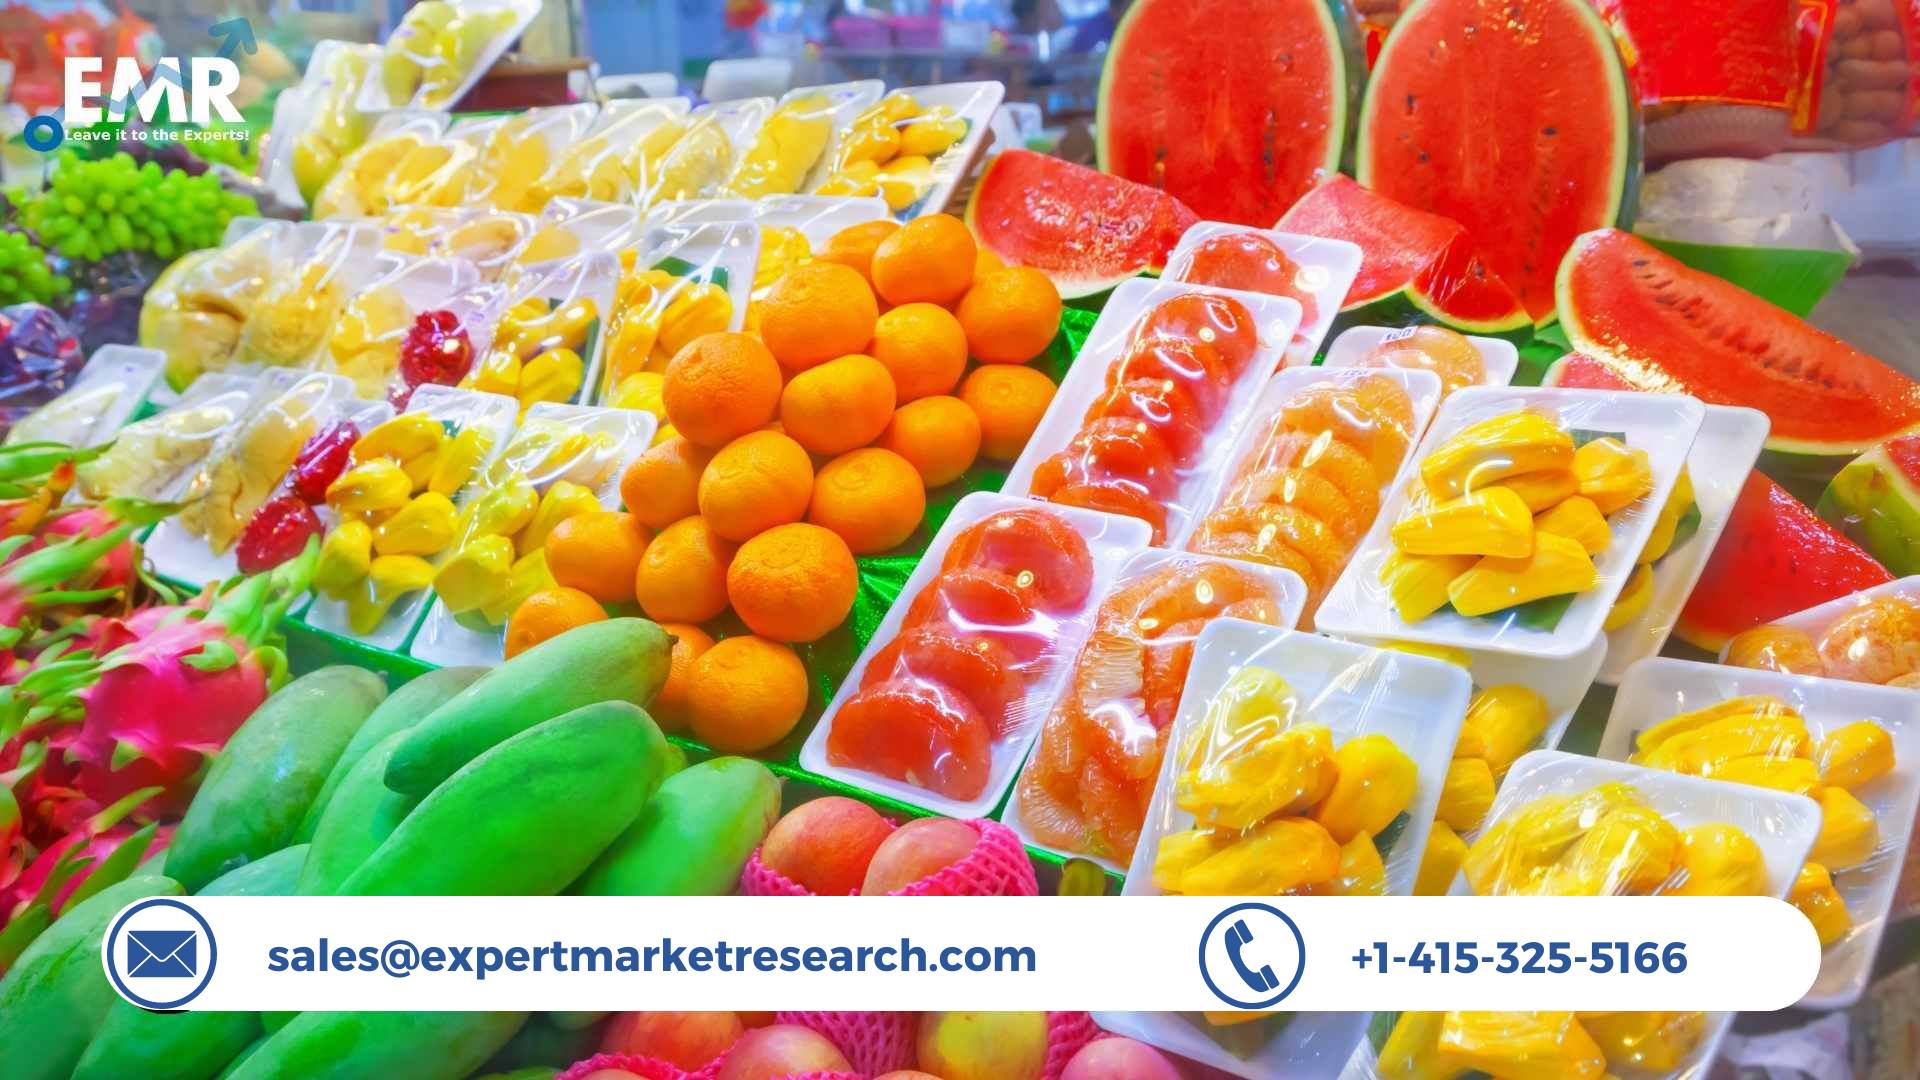 Global Fruits Market To Be Driven By The Rising Demand For Variety Of Fruits In The Forecast Period Of 2023-2028 | EMR Inc.